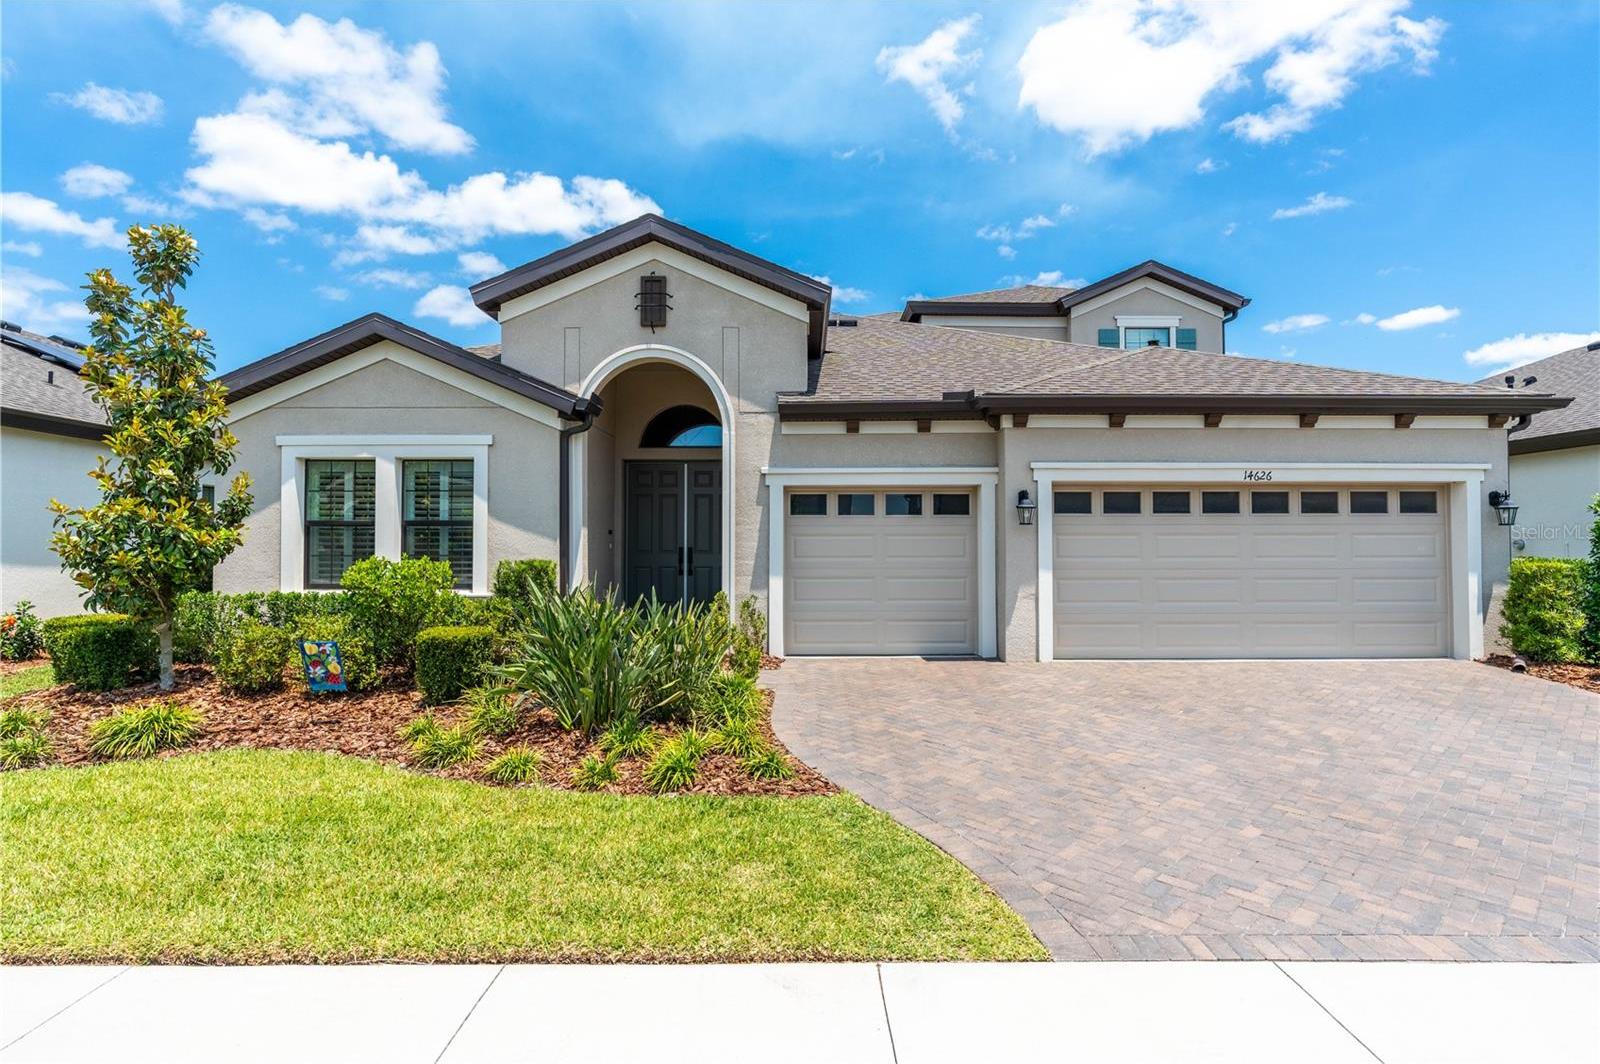 Photo one of 14626 Red Castle Ave Lithia FL 33547 | MLS T3522534